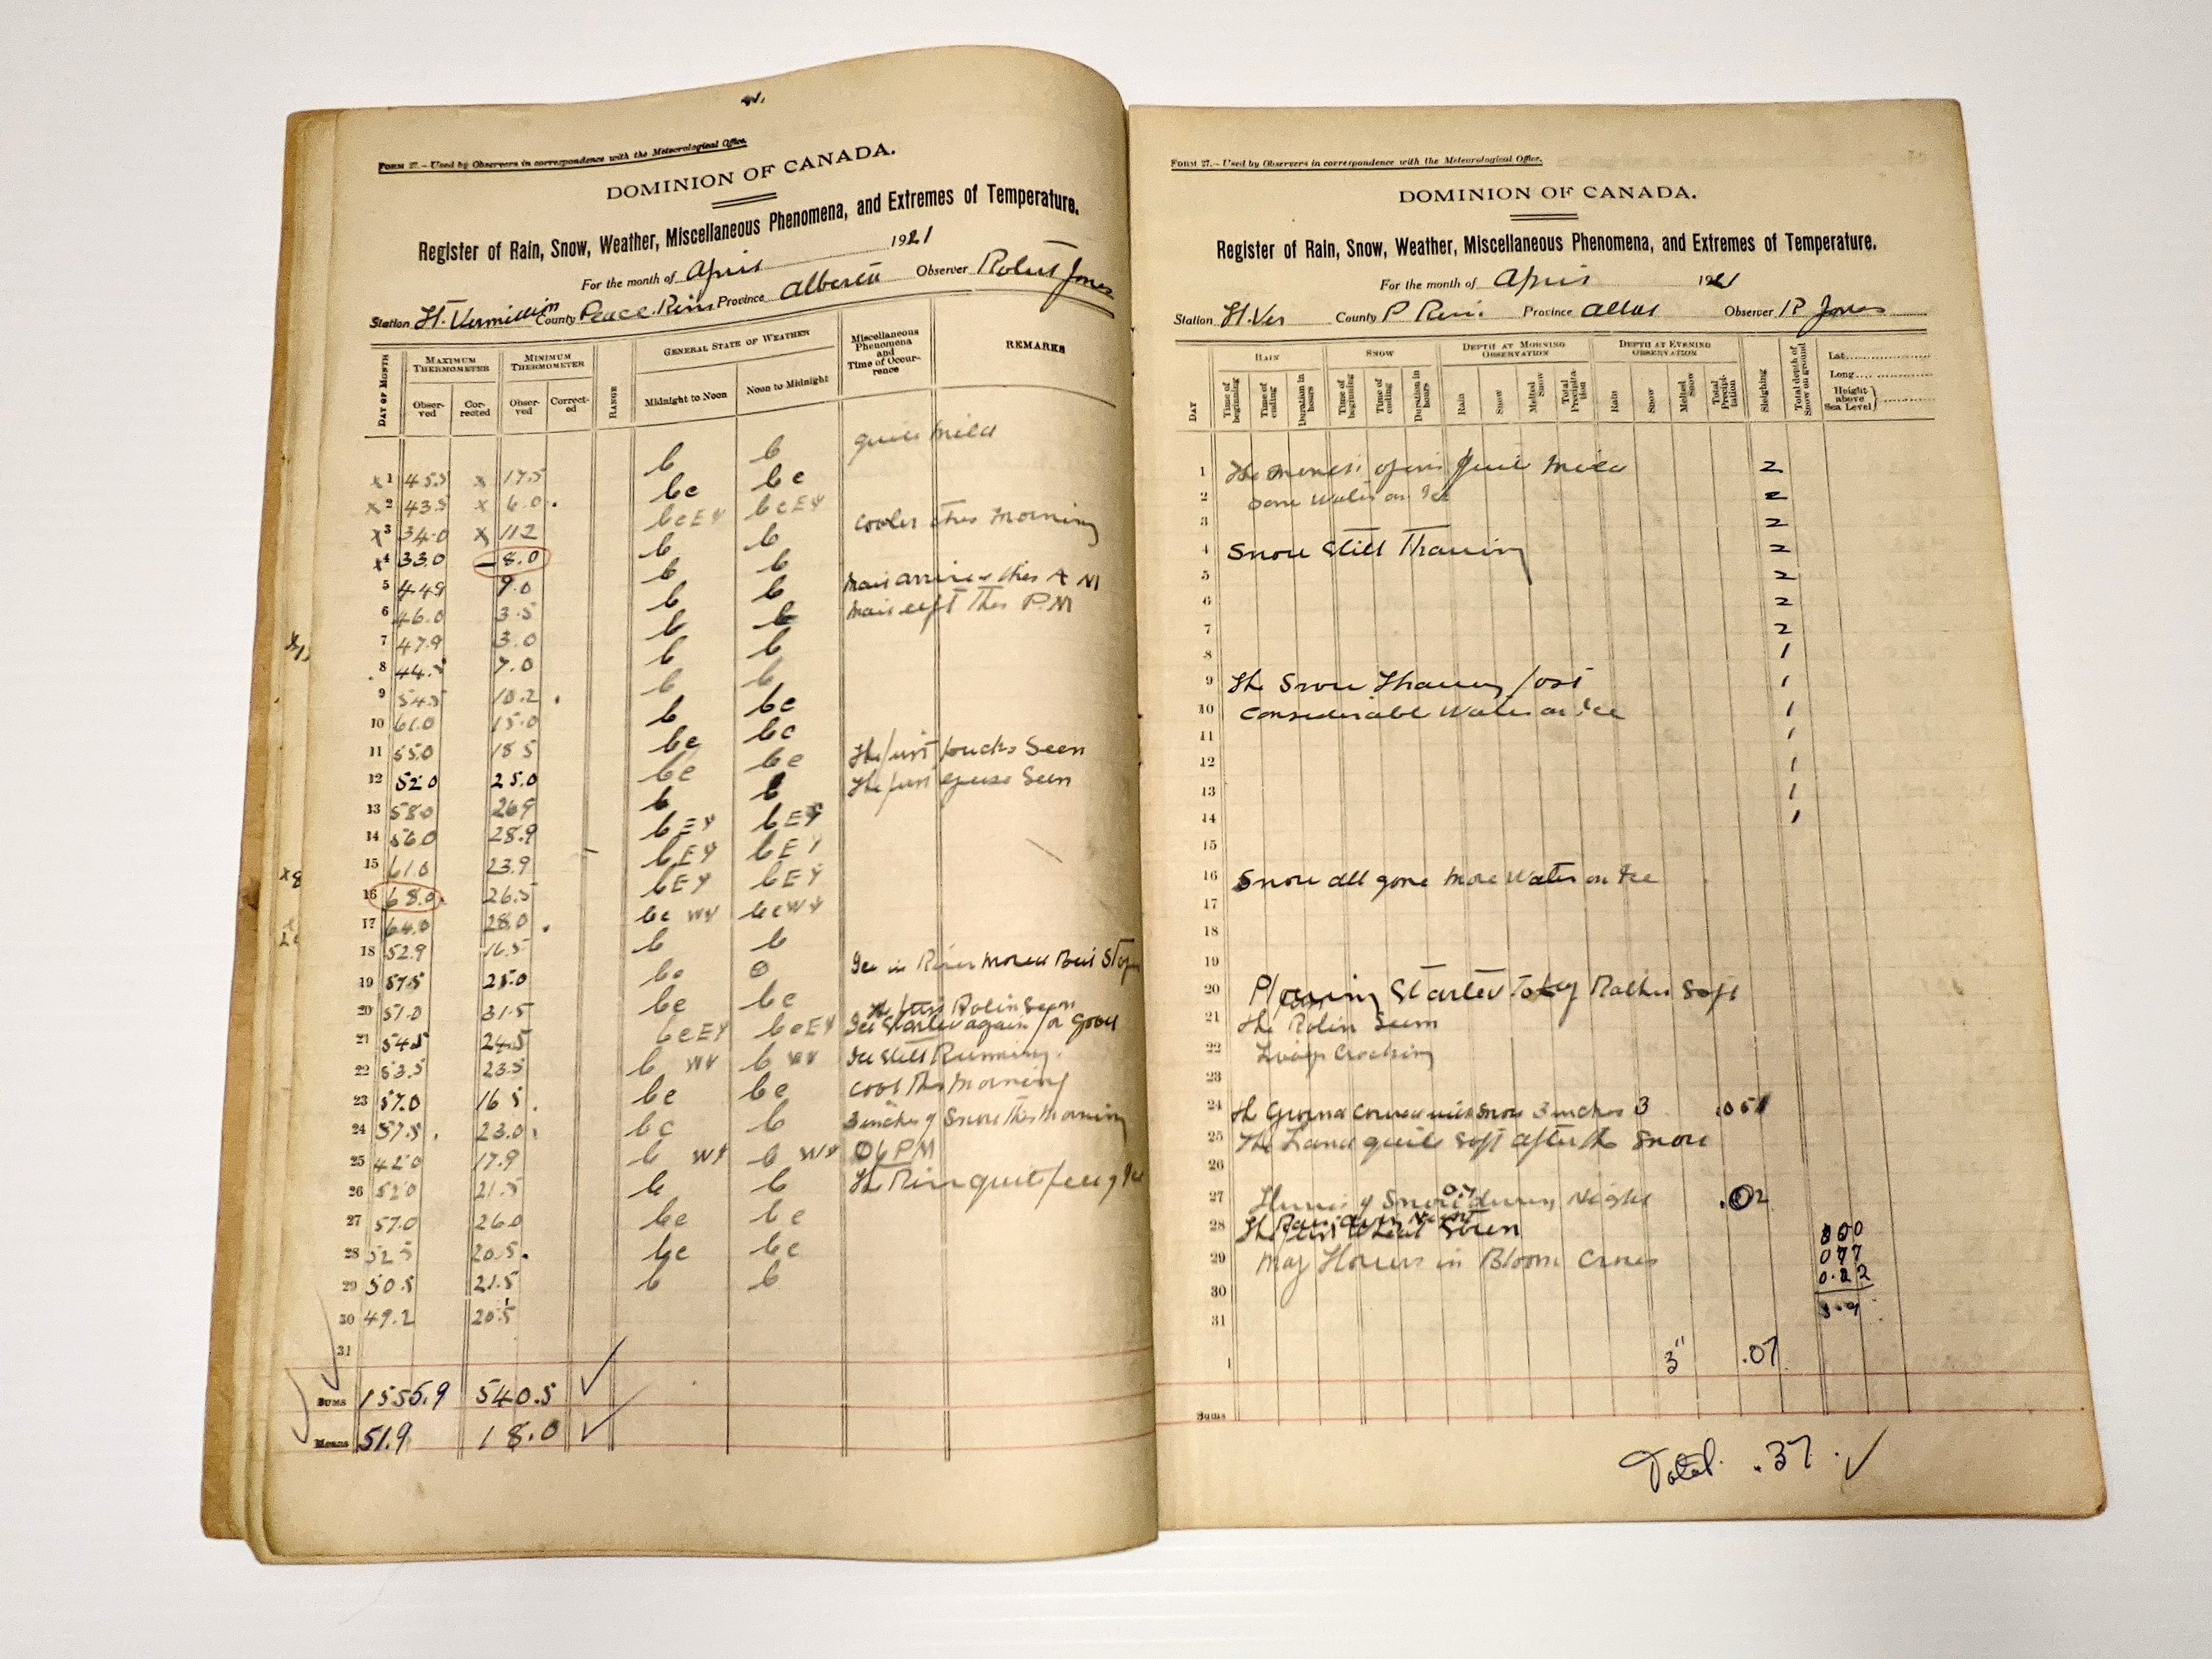 This week we have the Experimental Farm Meteorological Register from 1921! This booklet contains the entire year of records but we opened up to April to compare the temperatures today with those 100 years ago! The temperature is quite similar to today (April 19th) with highs of 57.5 (13°C) and lows of  25 (-3°C). You'll notice on April 16th it is noted "Snow all gone more water on ice", however on the 24th 3 inches of snow fell - lets hope it is not the same this year!

19/04/2021
Fort Vermilion Experimental Farm